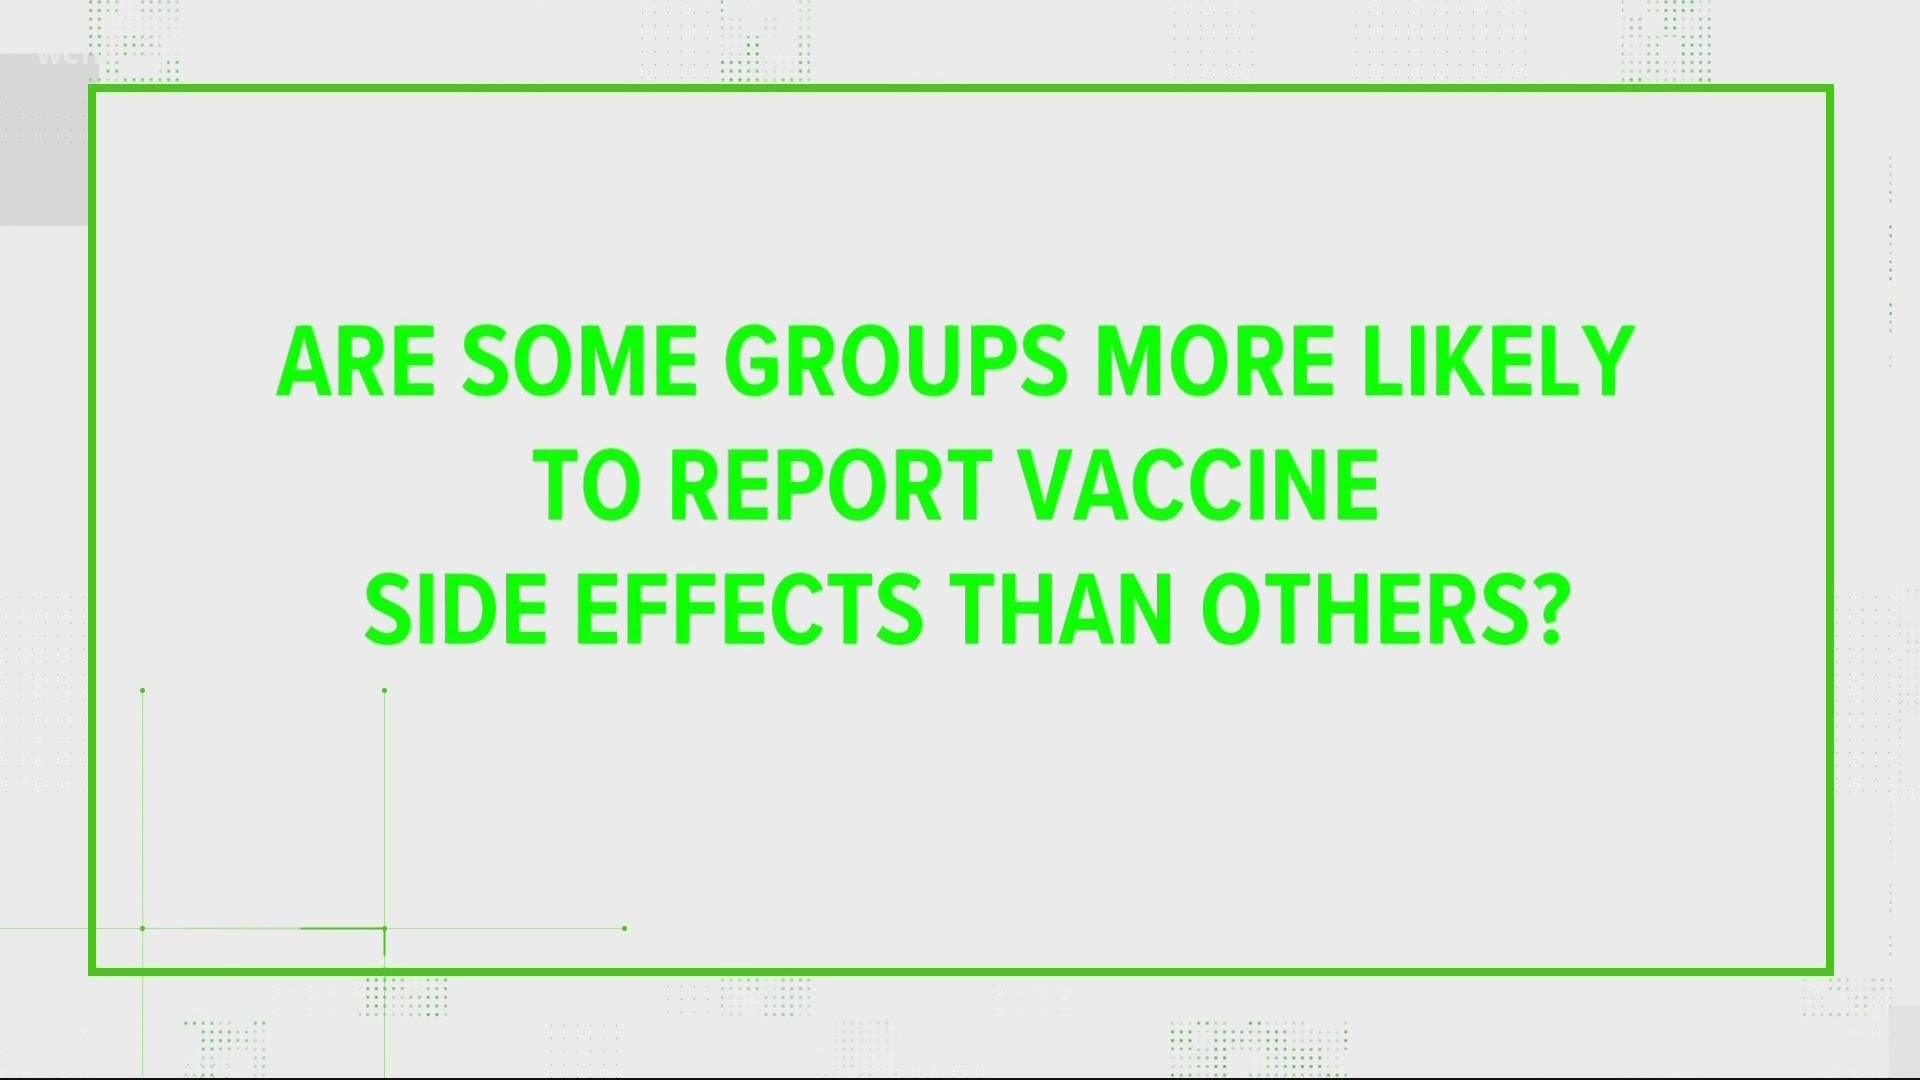 Data from clinical trials of all three U.S.-available vaccines shows younger people were more likely to report side effects.